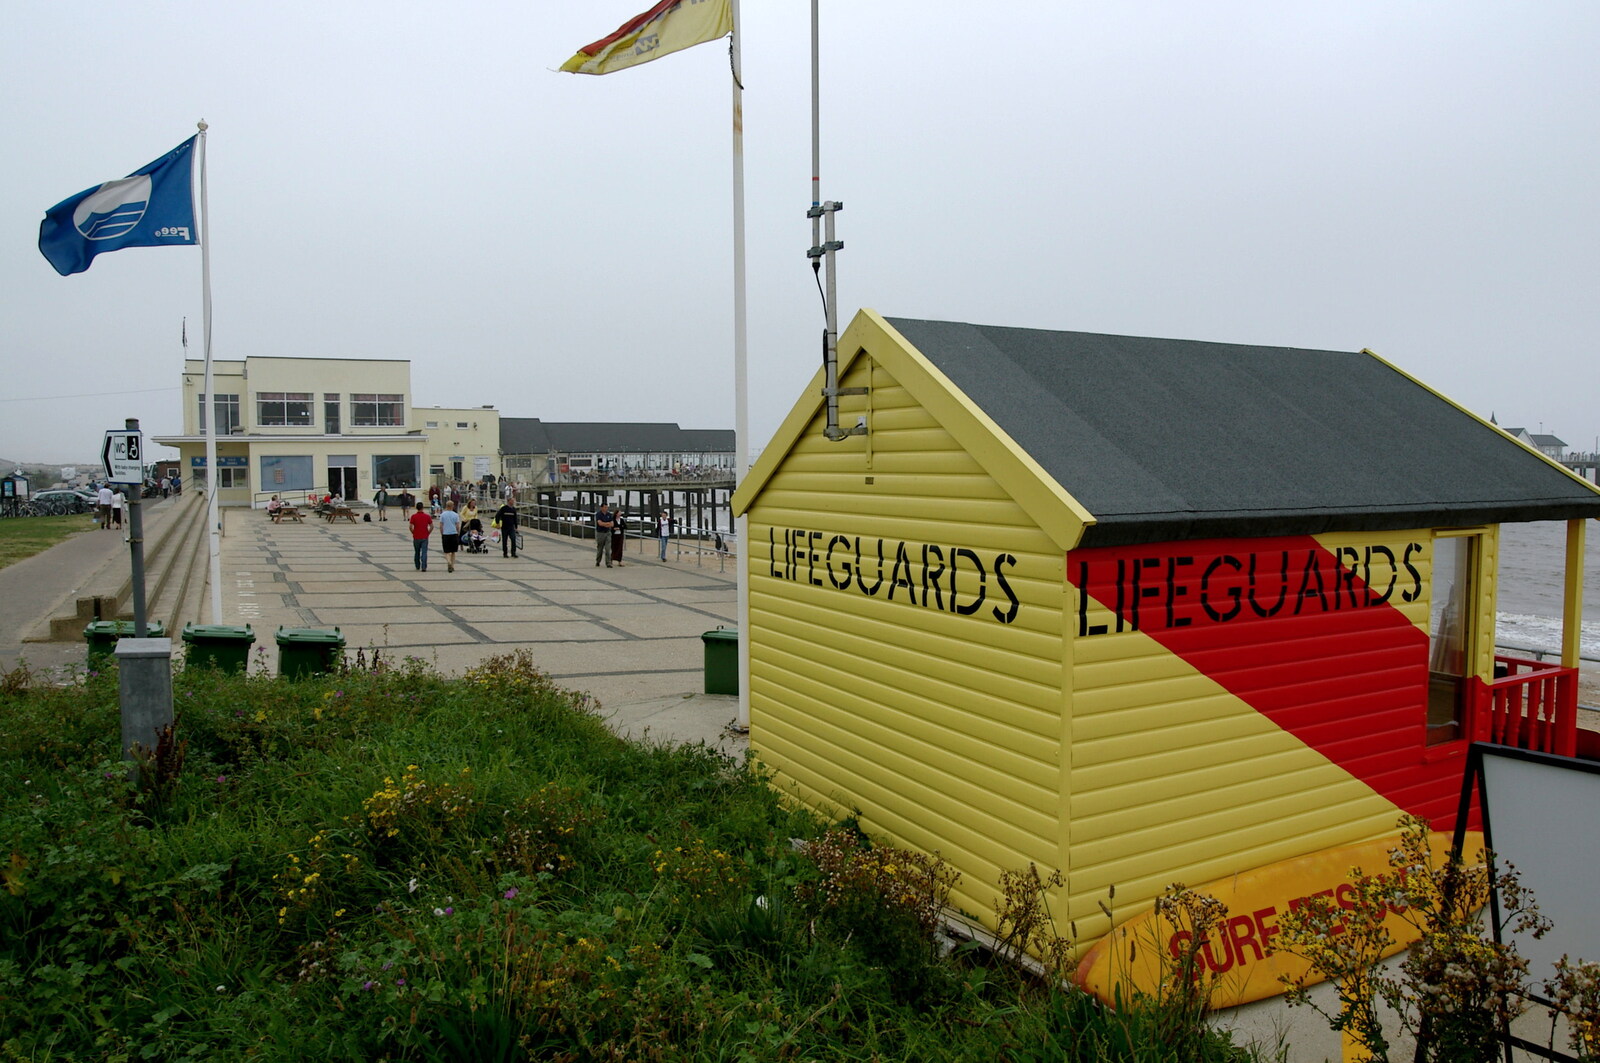 The lifeguard hut from Sally and Paul's Wedding on the Pier, Southwold, Suffolk - 3rd September 2005